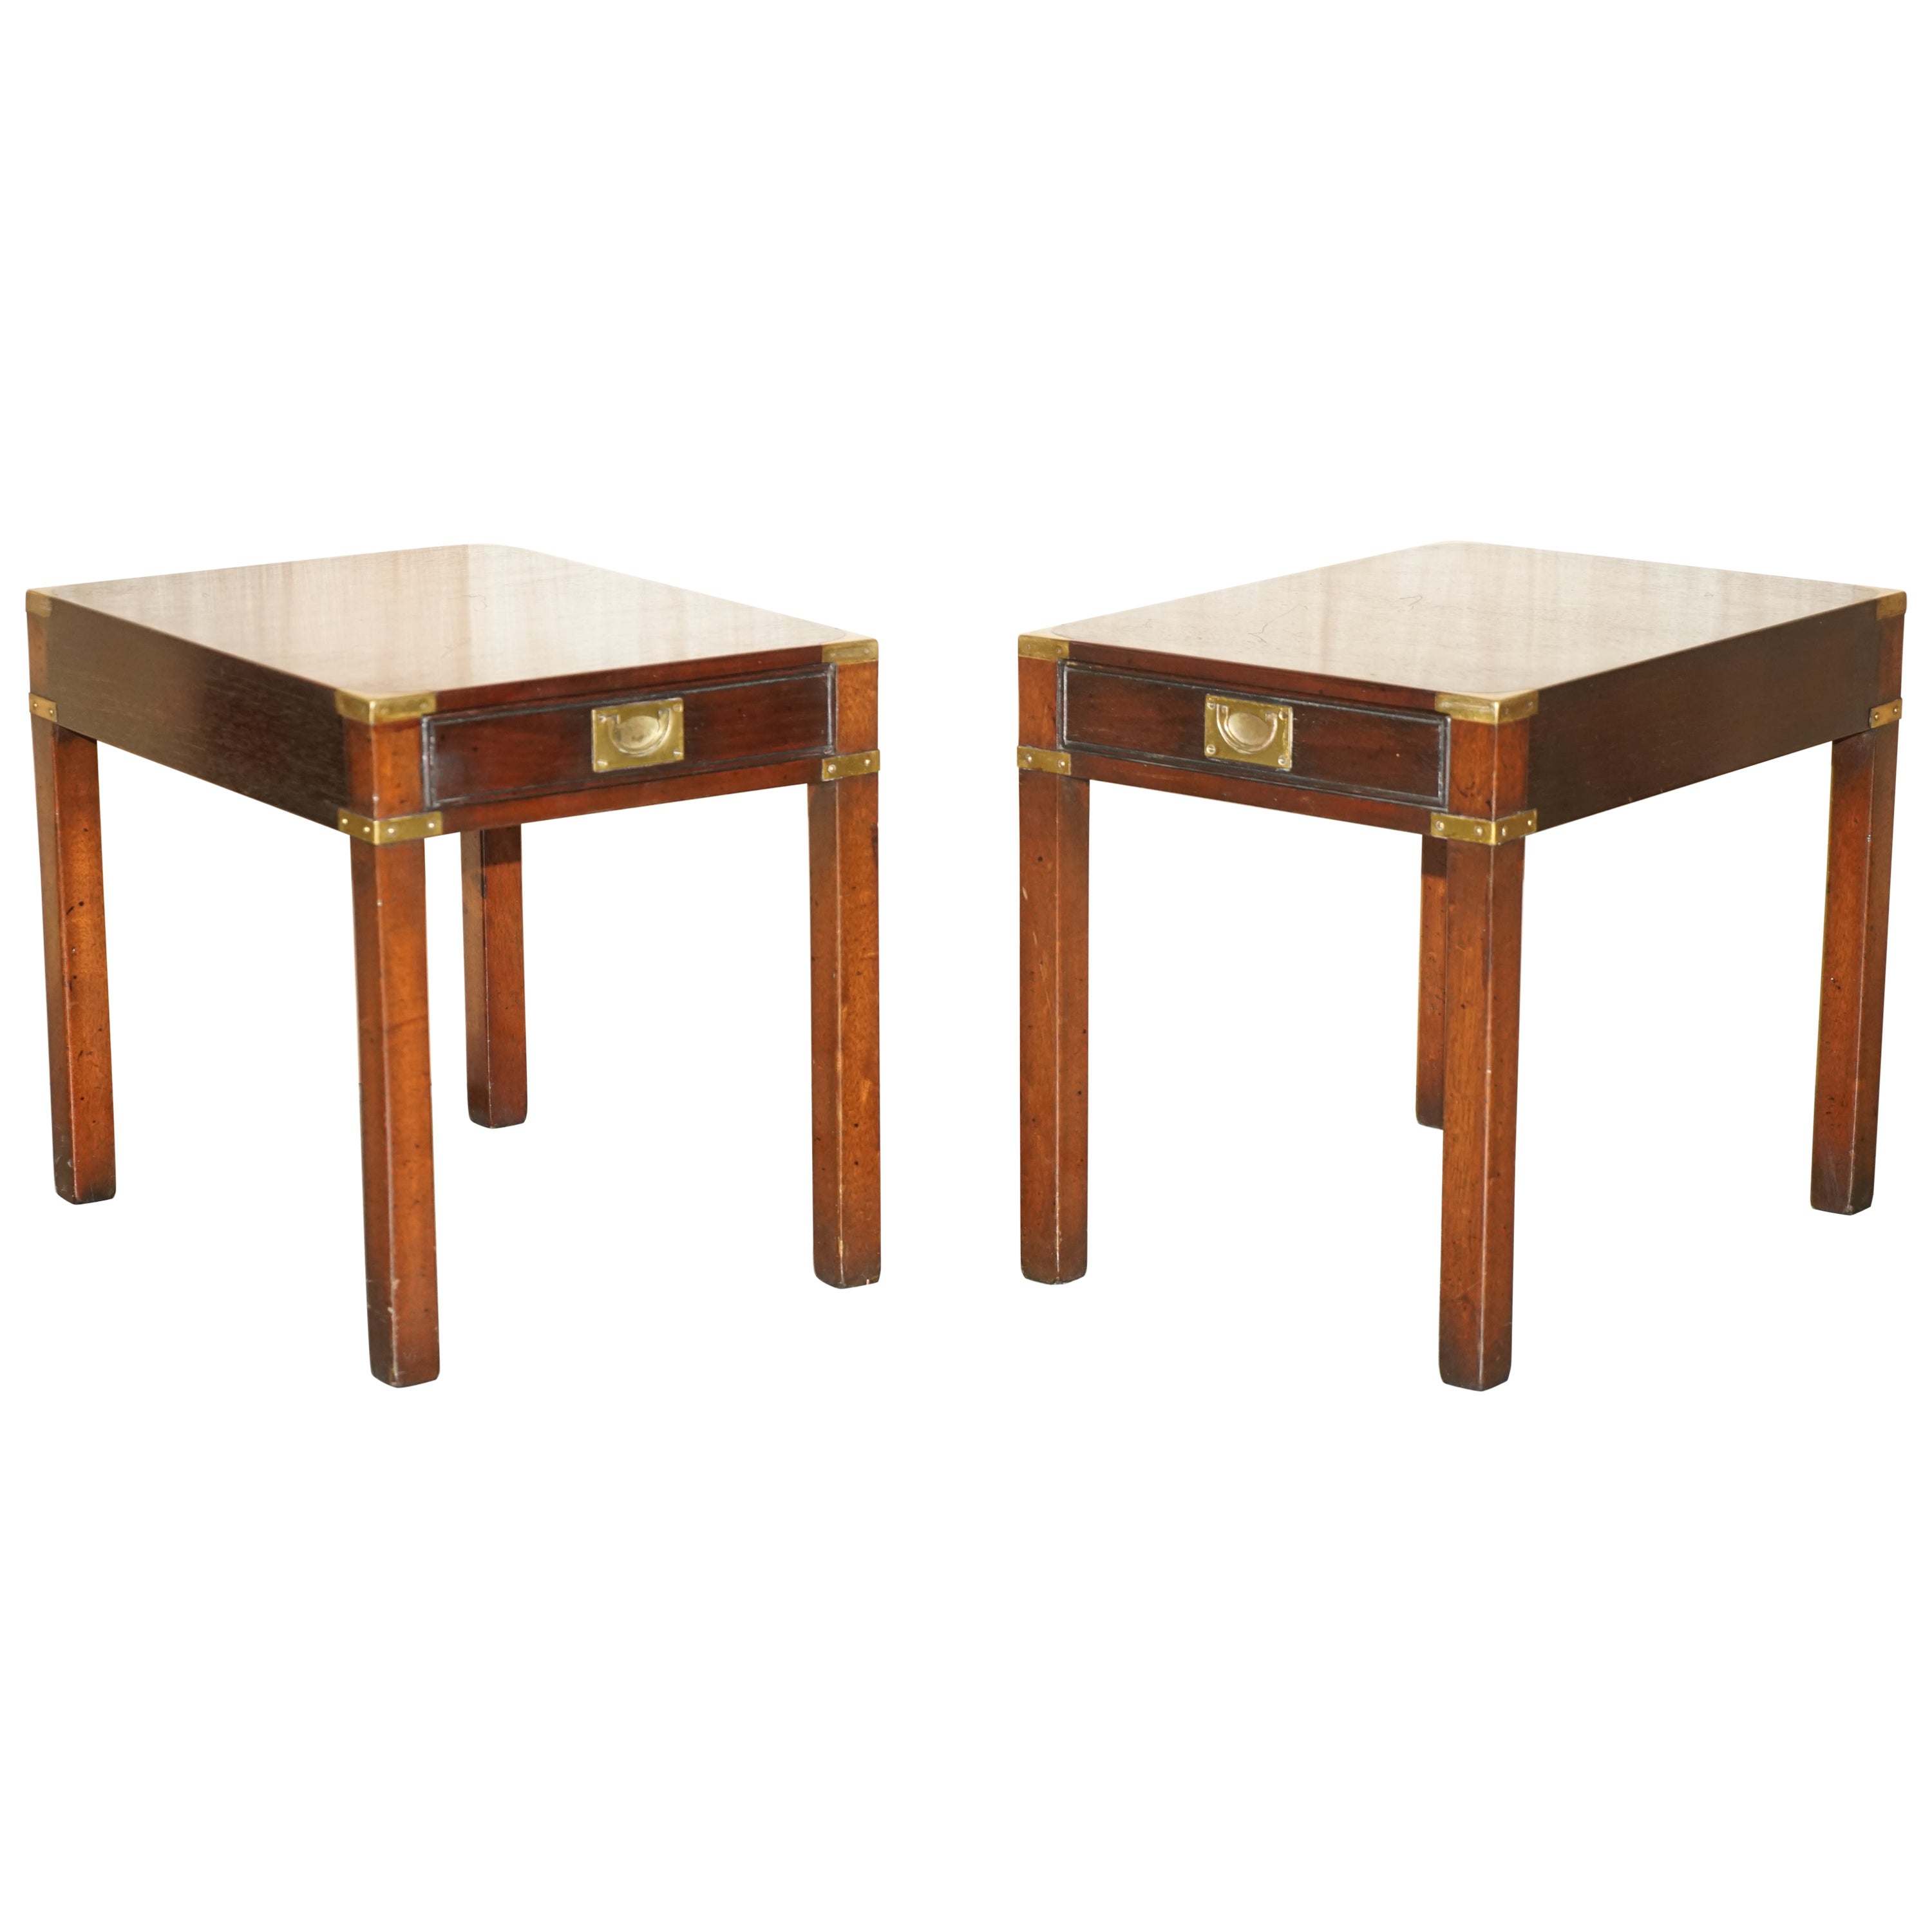 Pair of Restored Harrods Kennedy Hardwood Military Campaign Single Drawer Tables For Sale